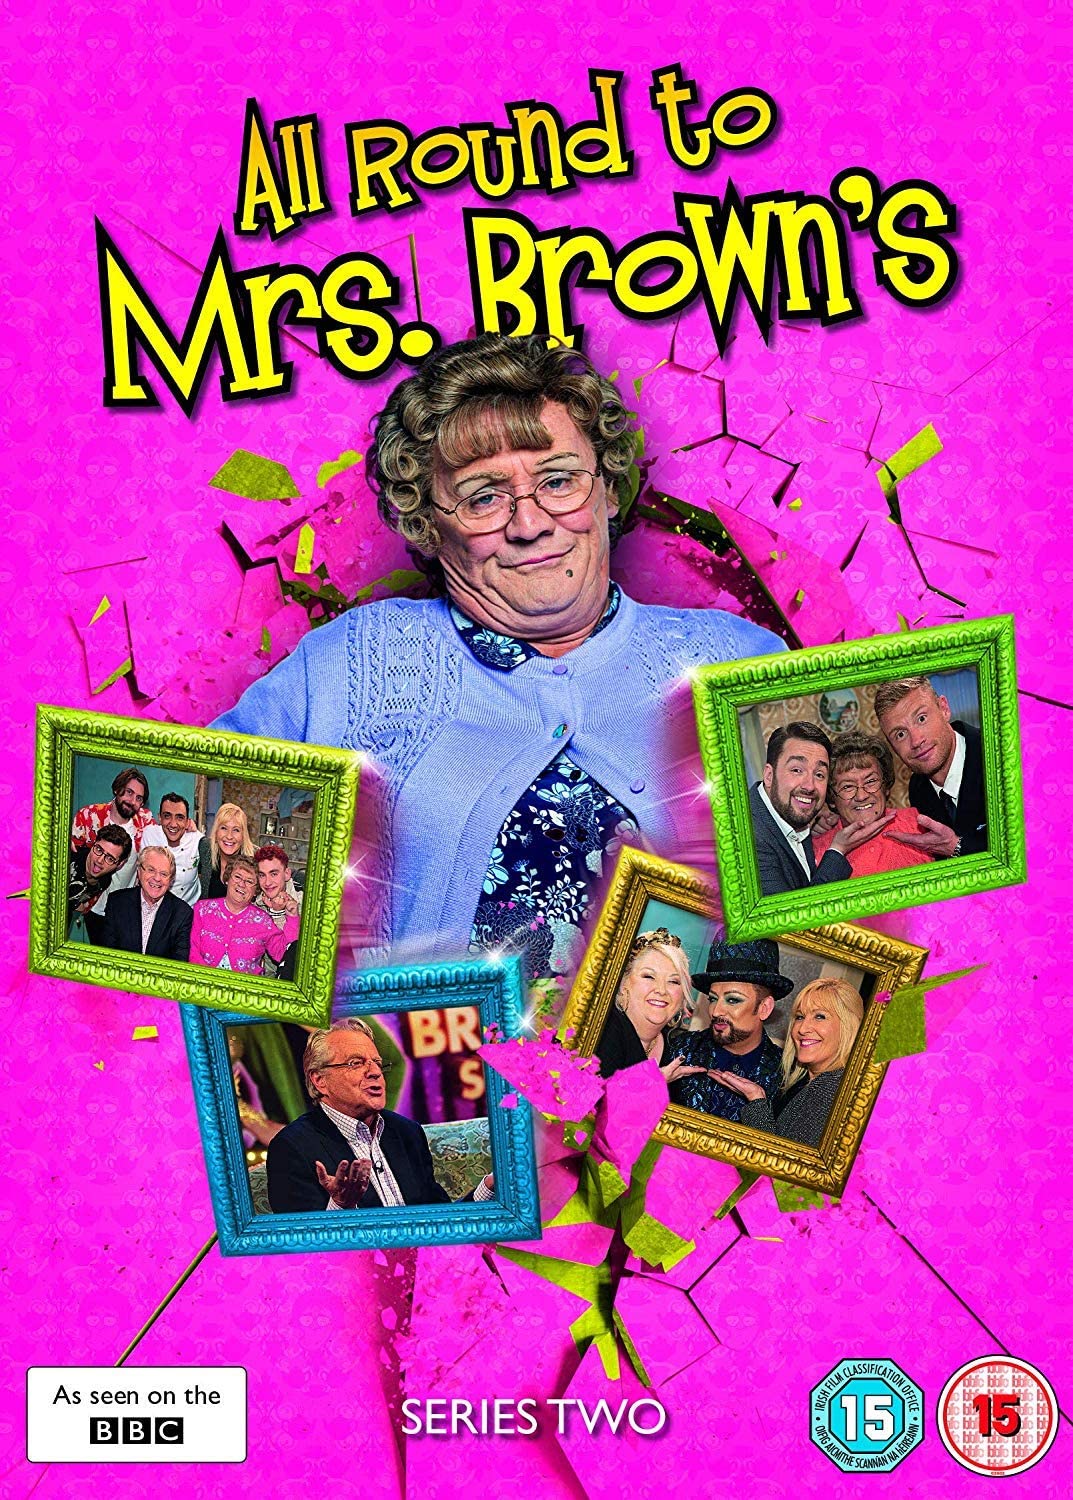 All Round To Mrs Brown's: Season 2